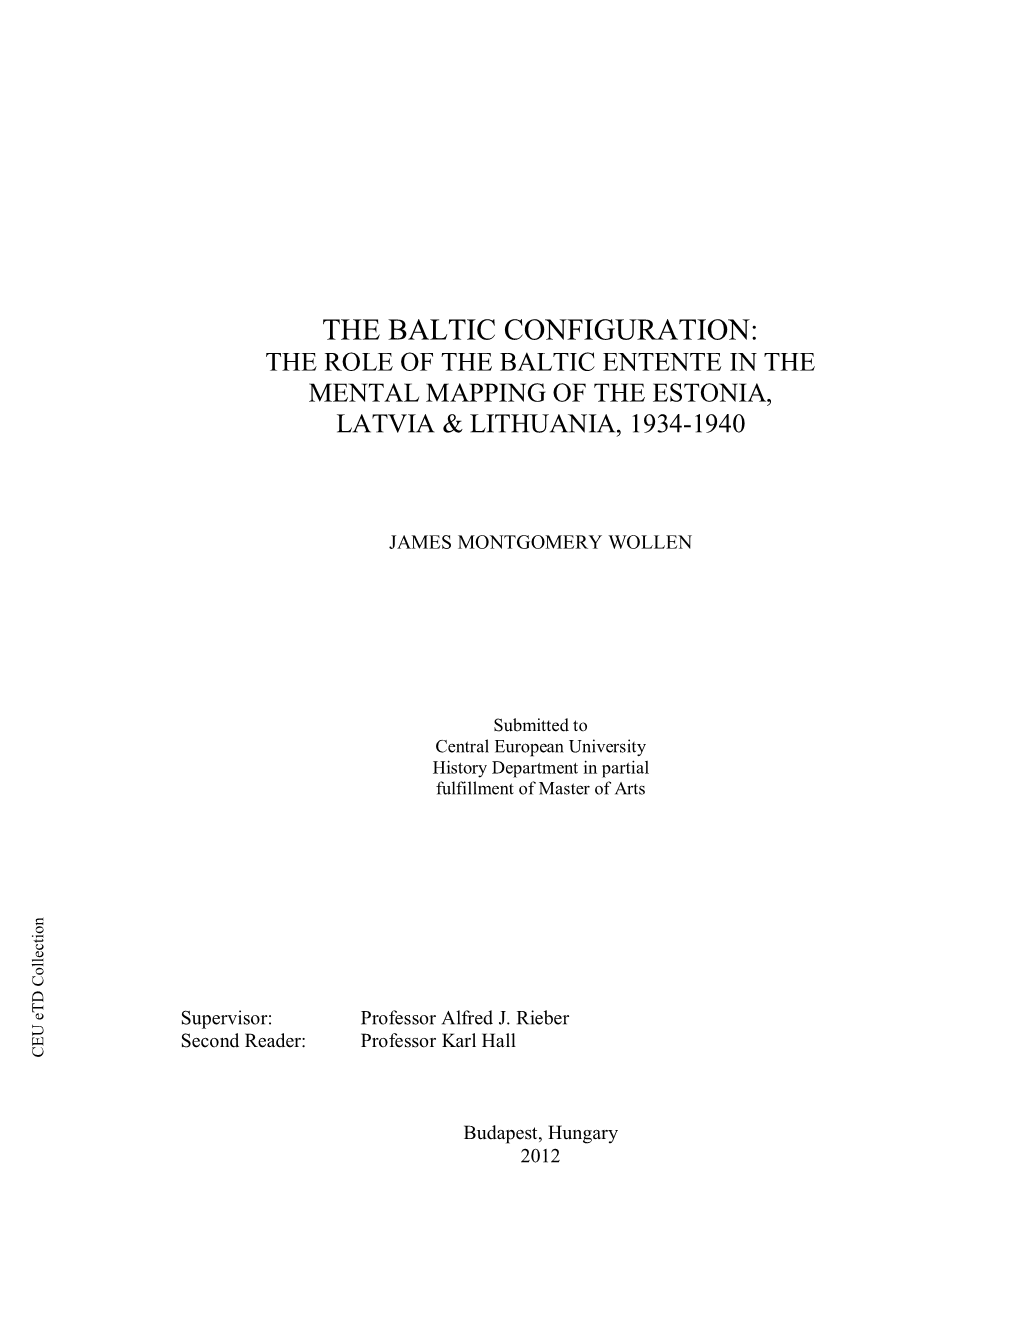 The Baltic Configuration